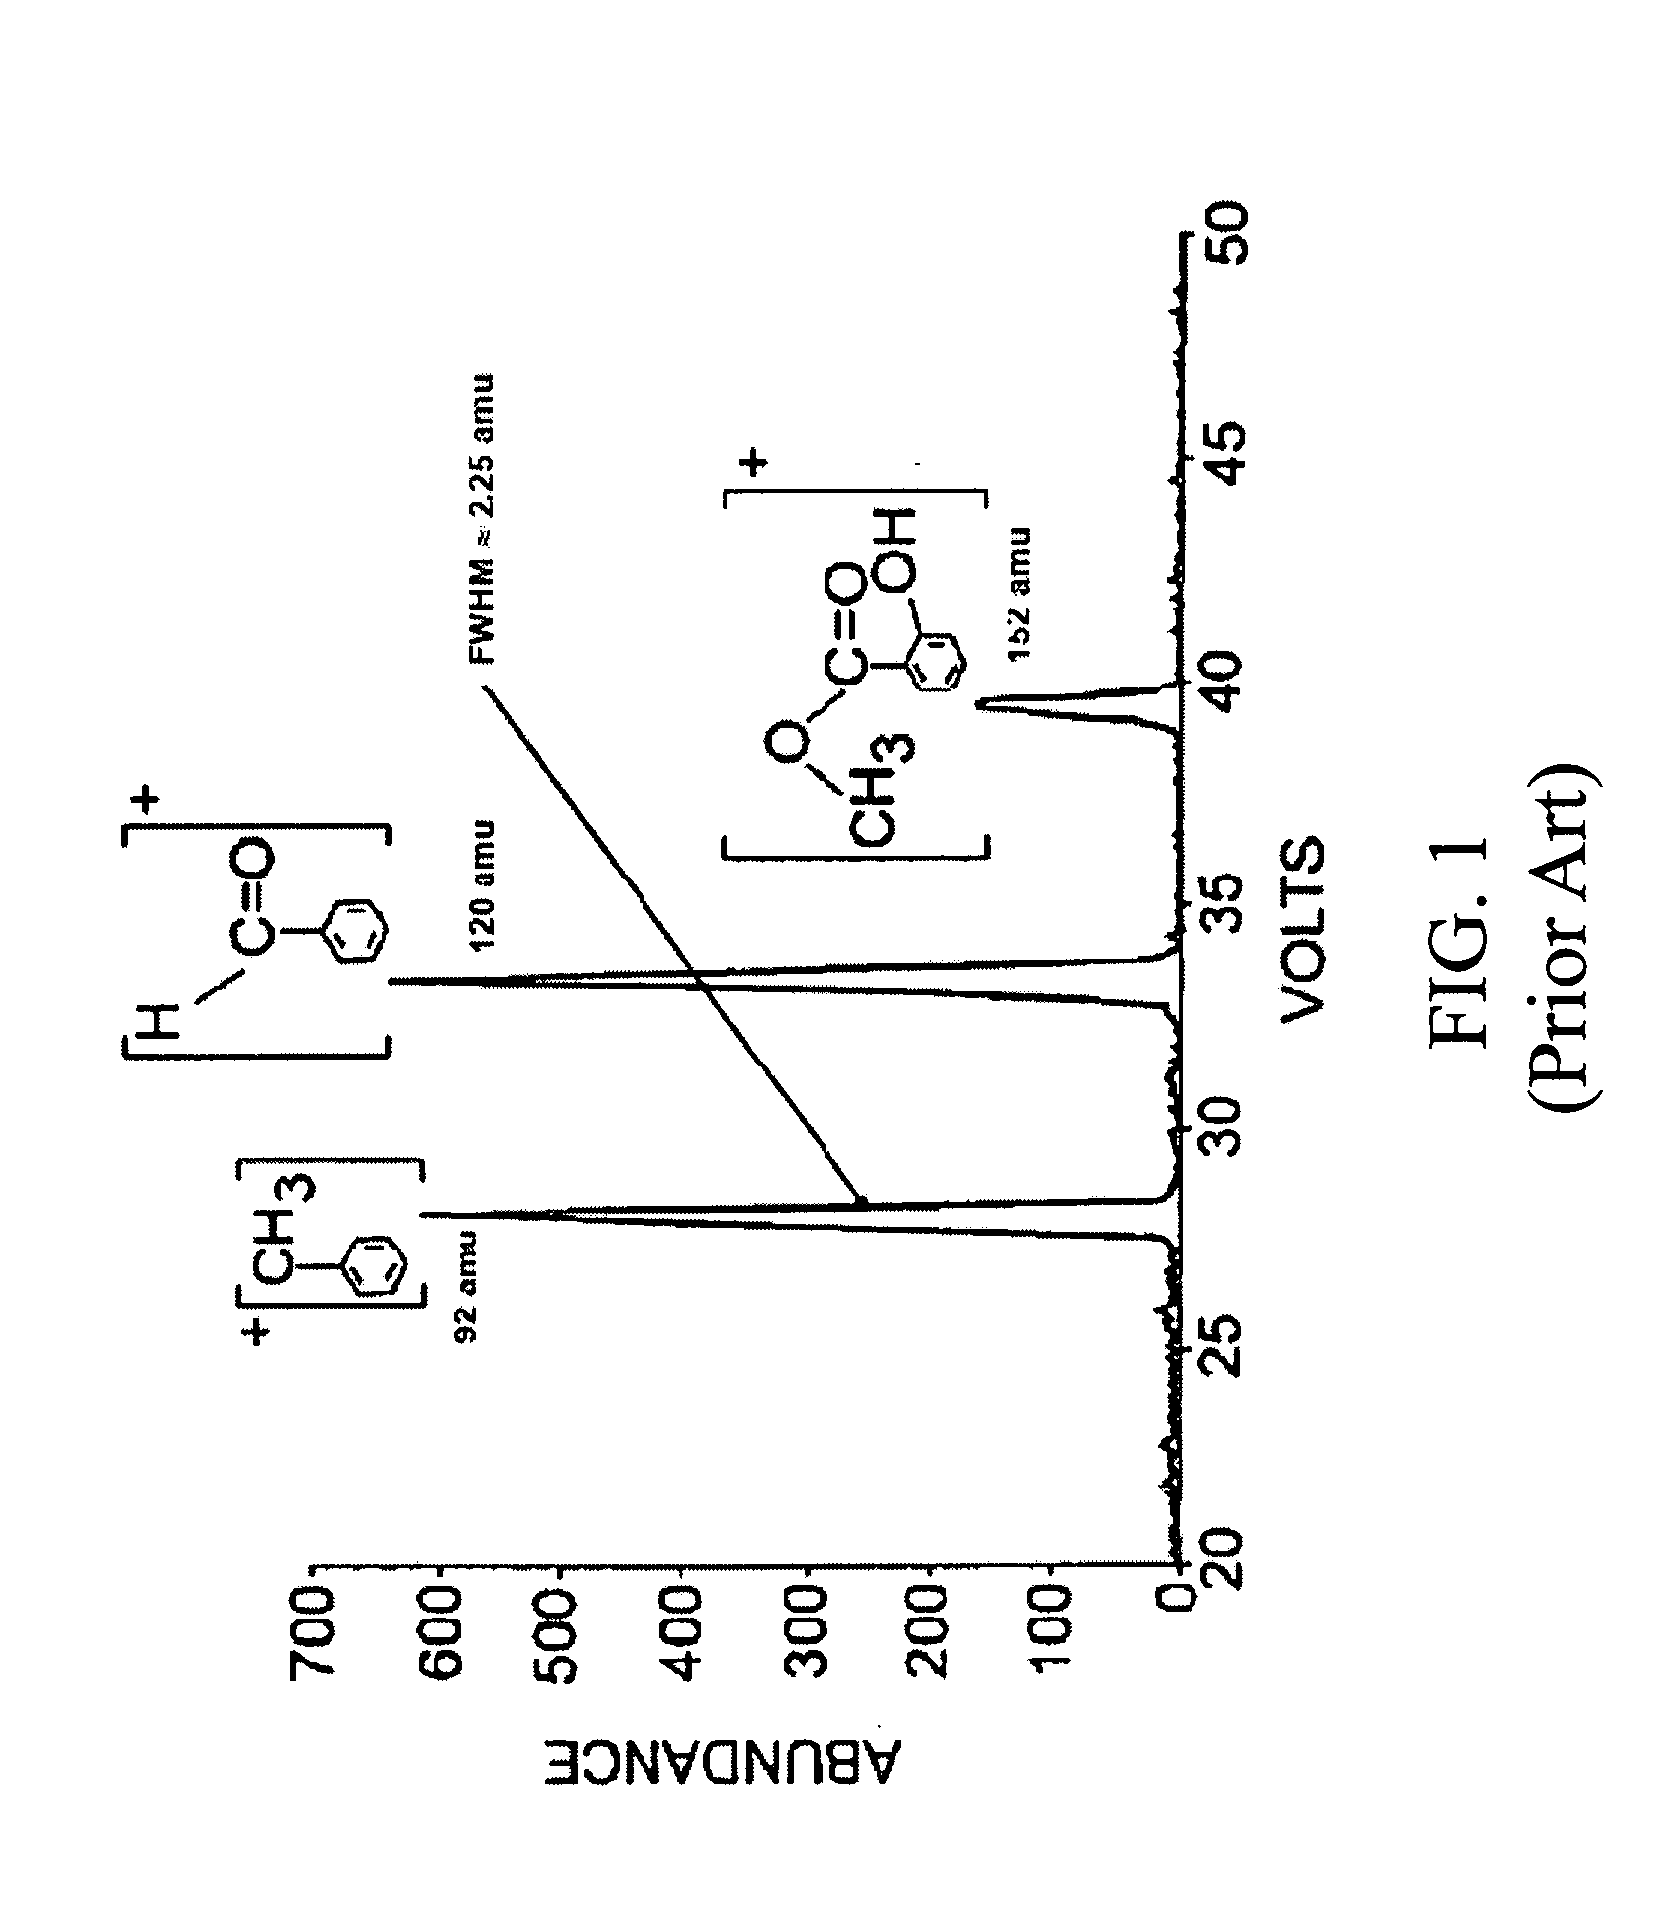 Electronic drive and acquisition system for mass spectrometry